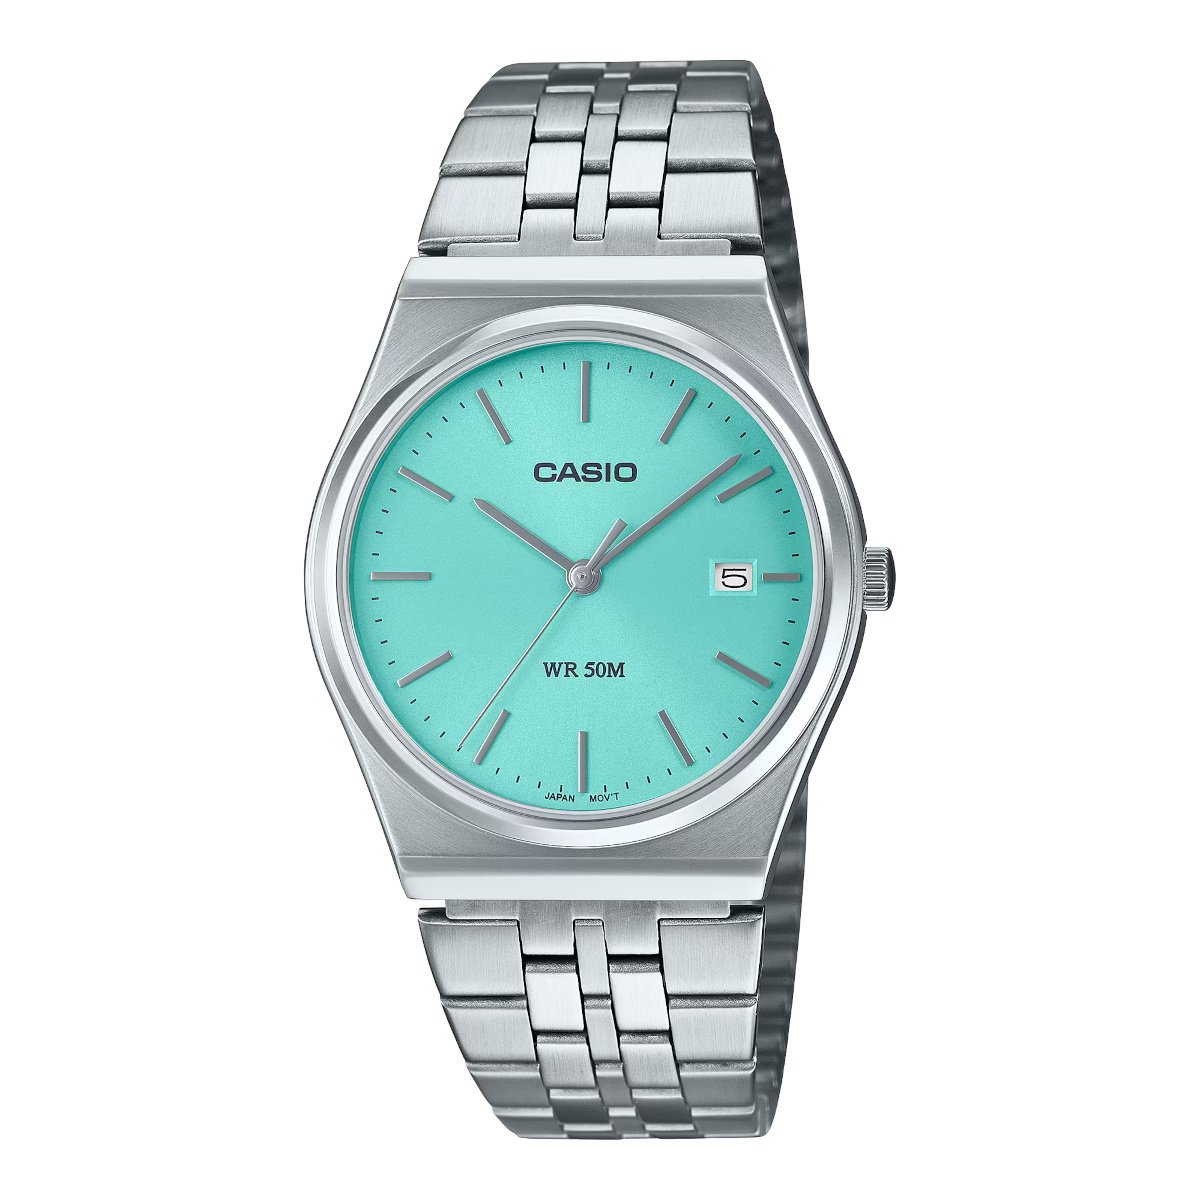 Casio 'Tiffany Blue' watch - Unboxing - MTP-1302PD-2A2VEF 